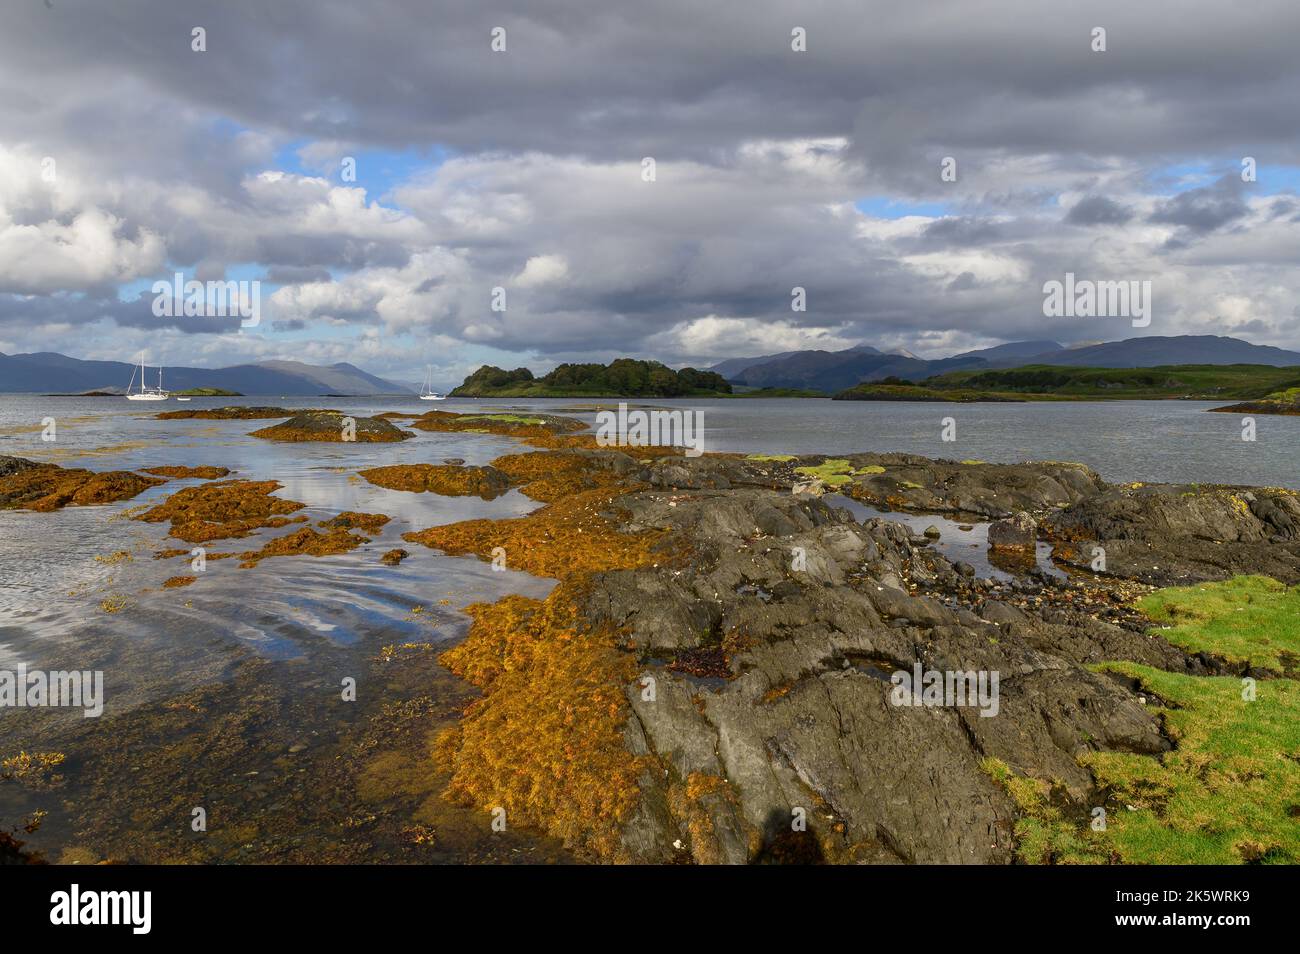 Looking into Loch line from Port Ramsay on The isle of Lismore, Scotland Stock Photo